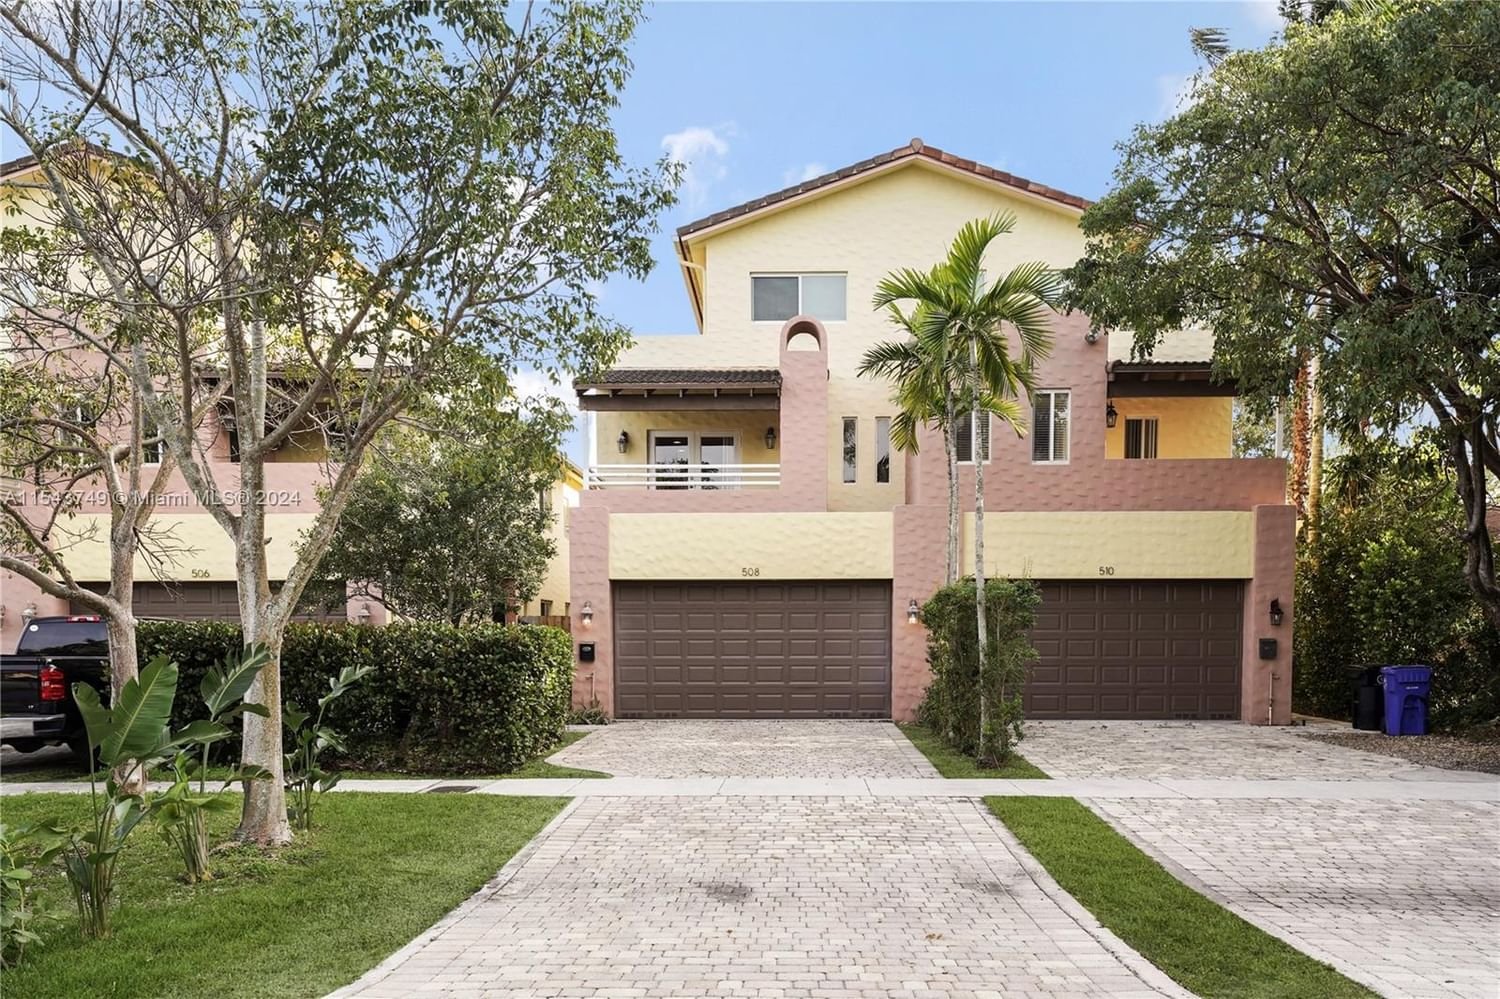 Real estate property located at 508 10 St, Broward County, LAUDERDALE, Fort Lauderdale, FL